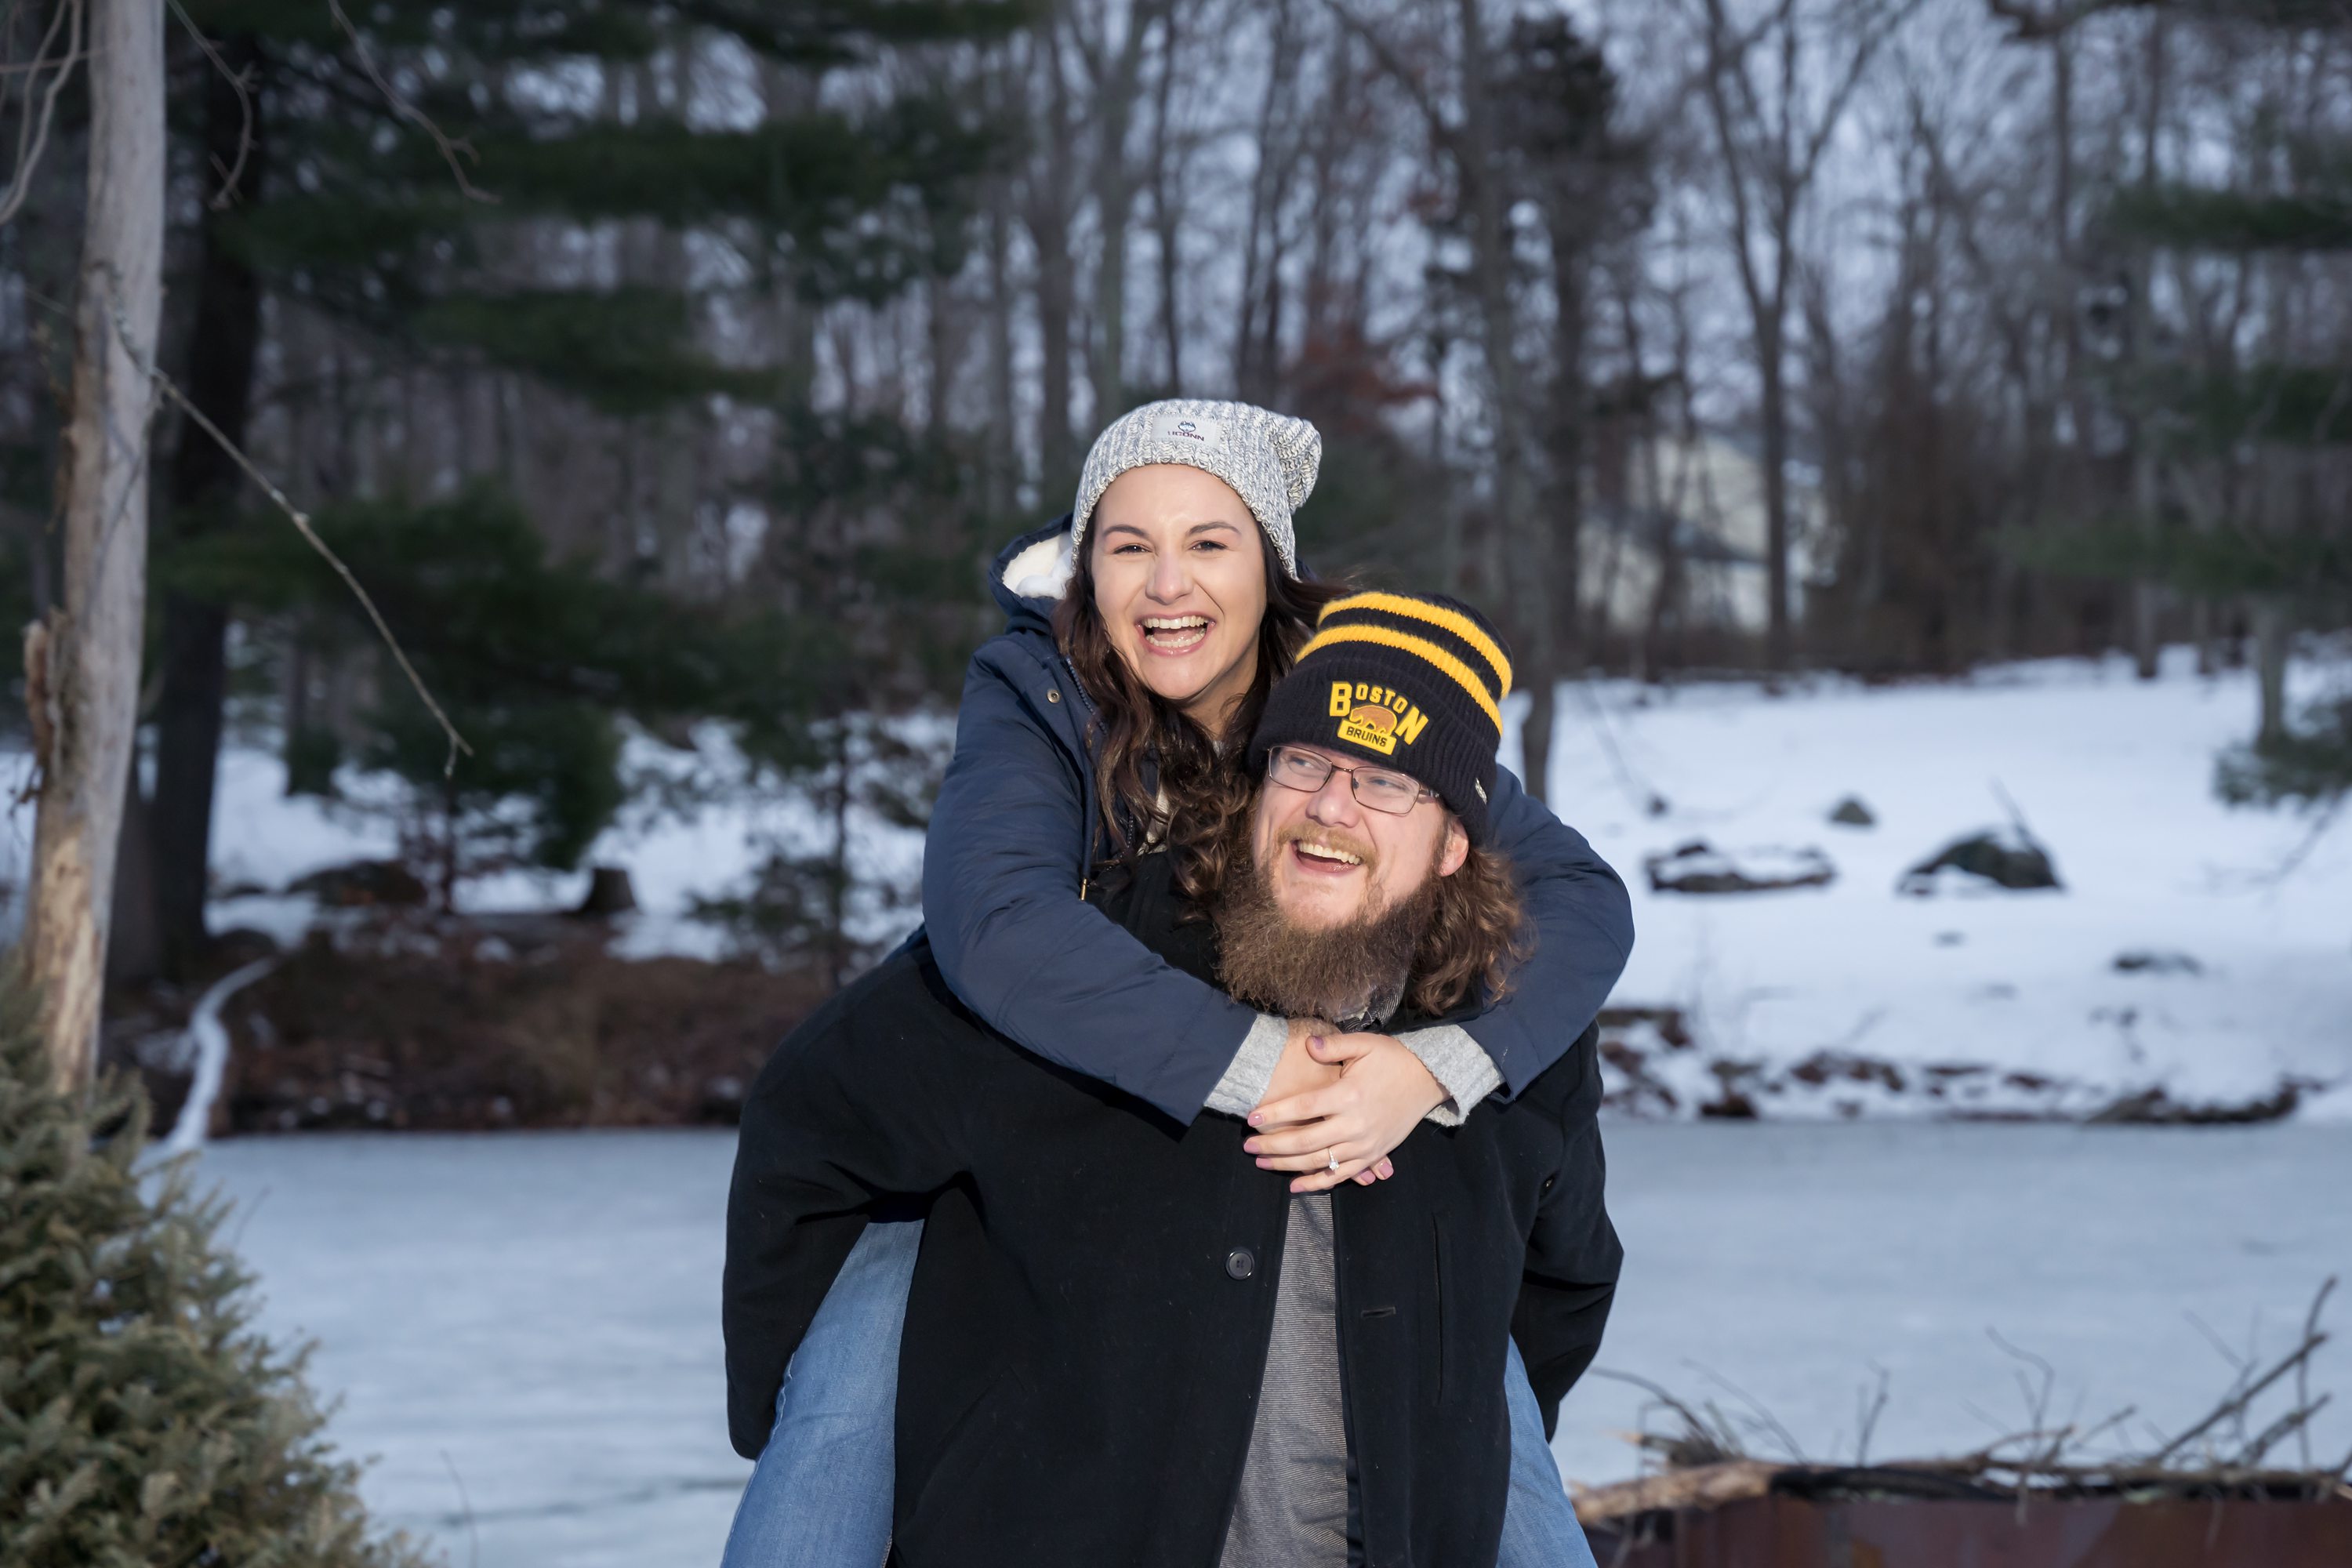 Rehoboth Wedding Photographer,Providence Wedding Photographer,Fun in the Snow at Engagement Session,Cute Engagement Images,How to have fun at engagement session